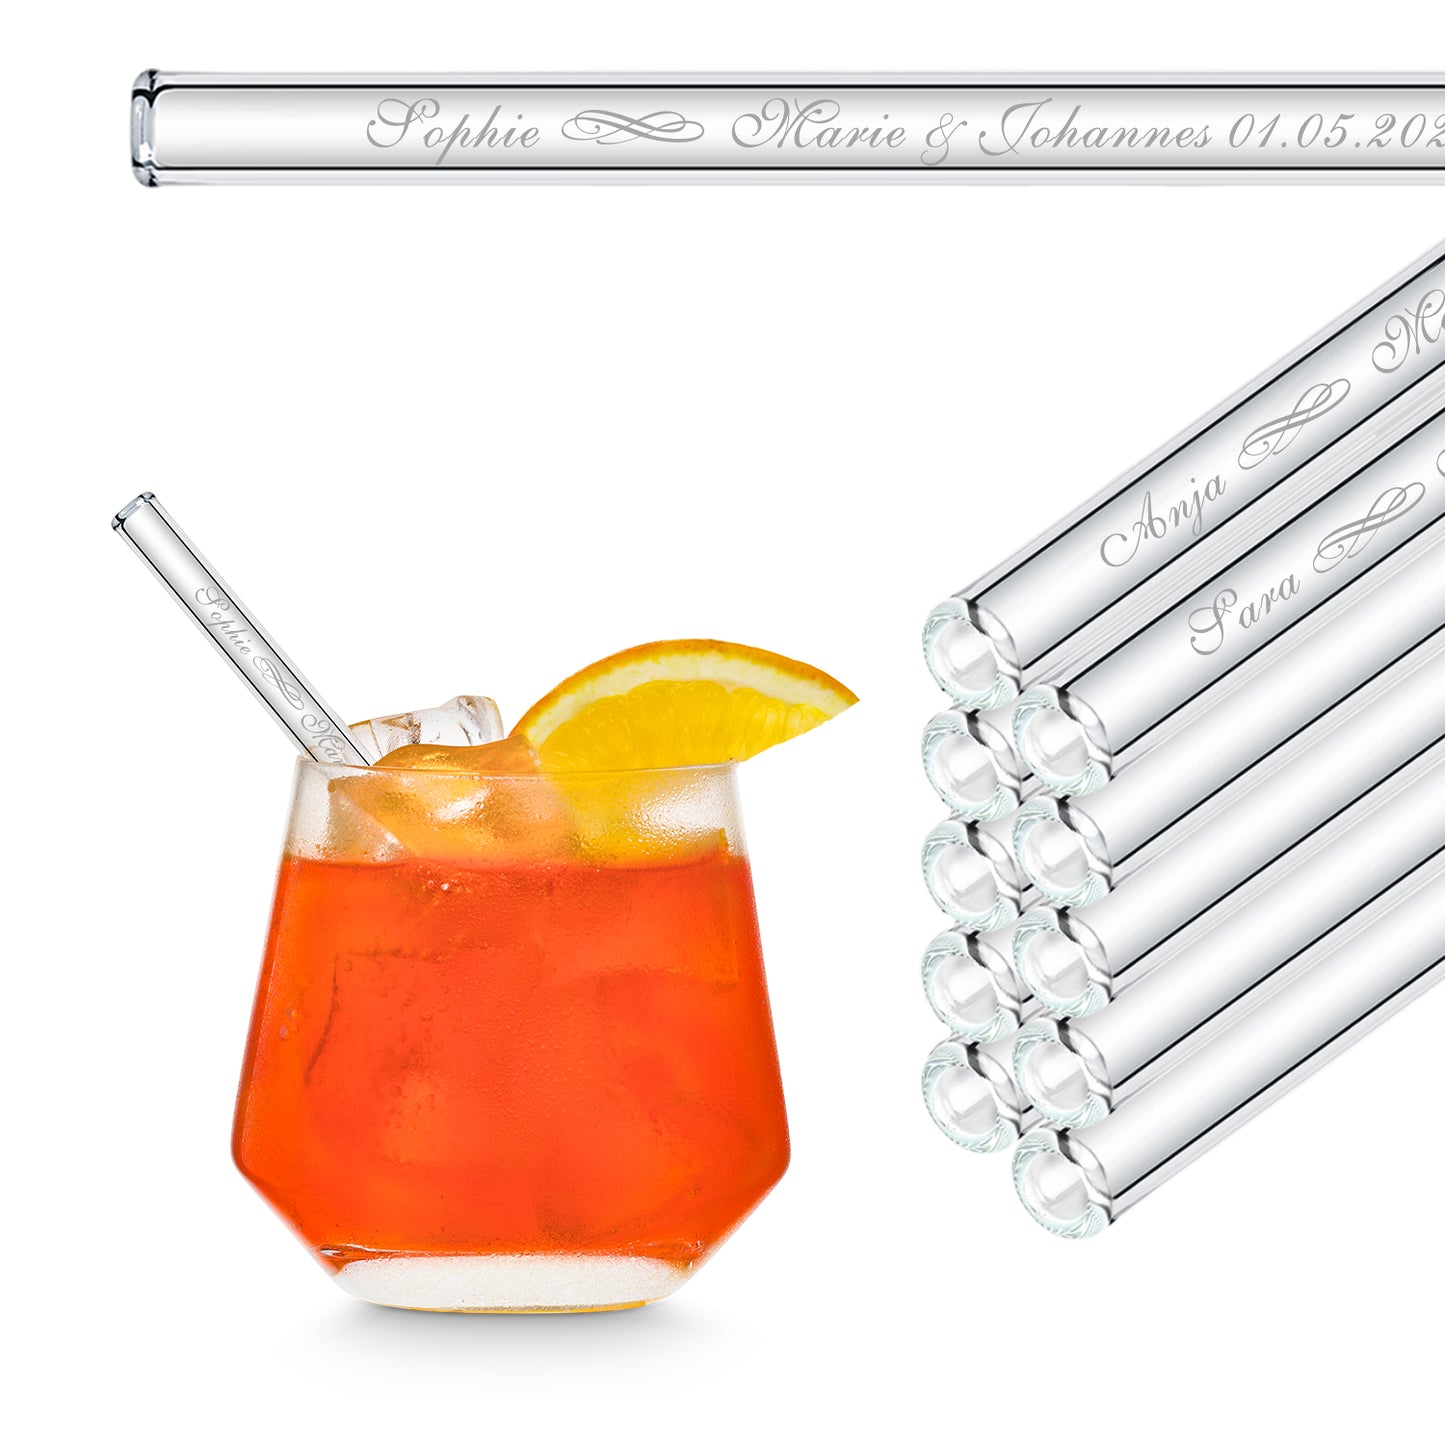 Personalized Wedding Favors - 50x Engraved Glass Straws with Guest Names